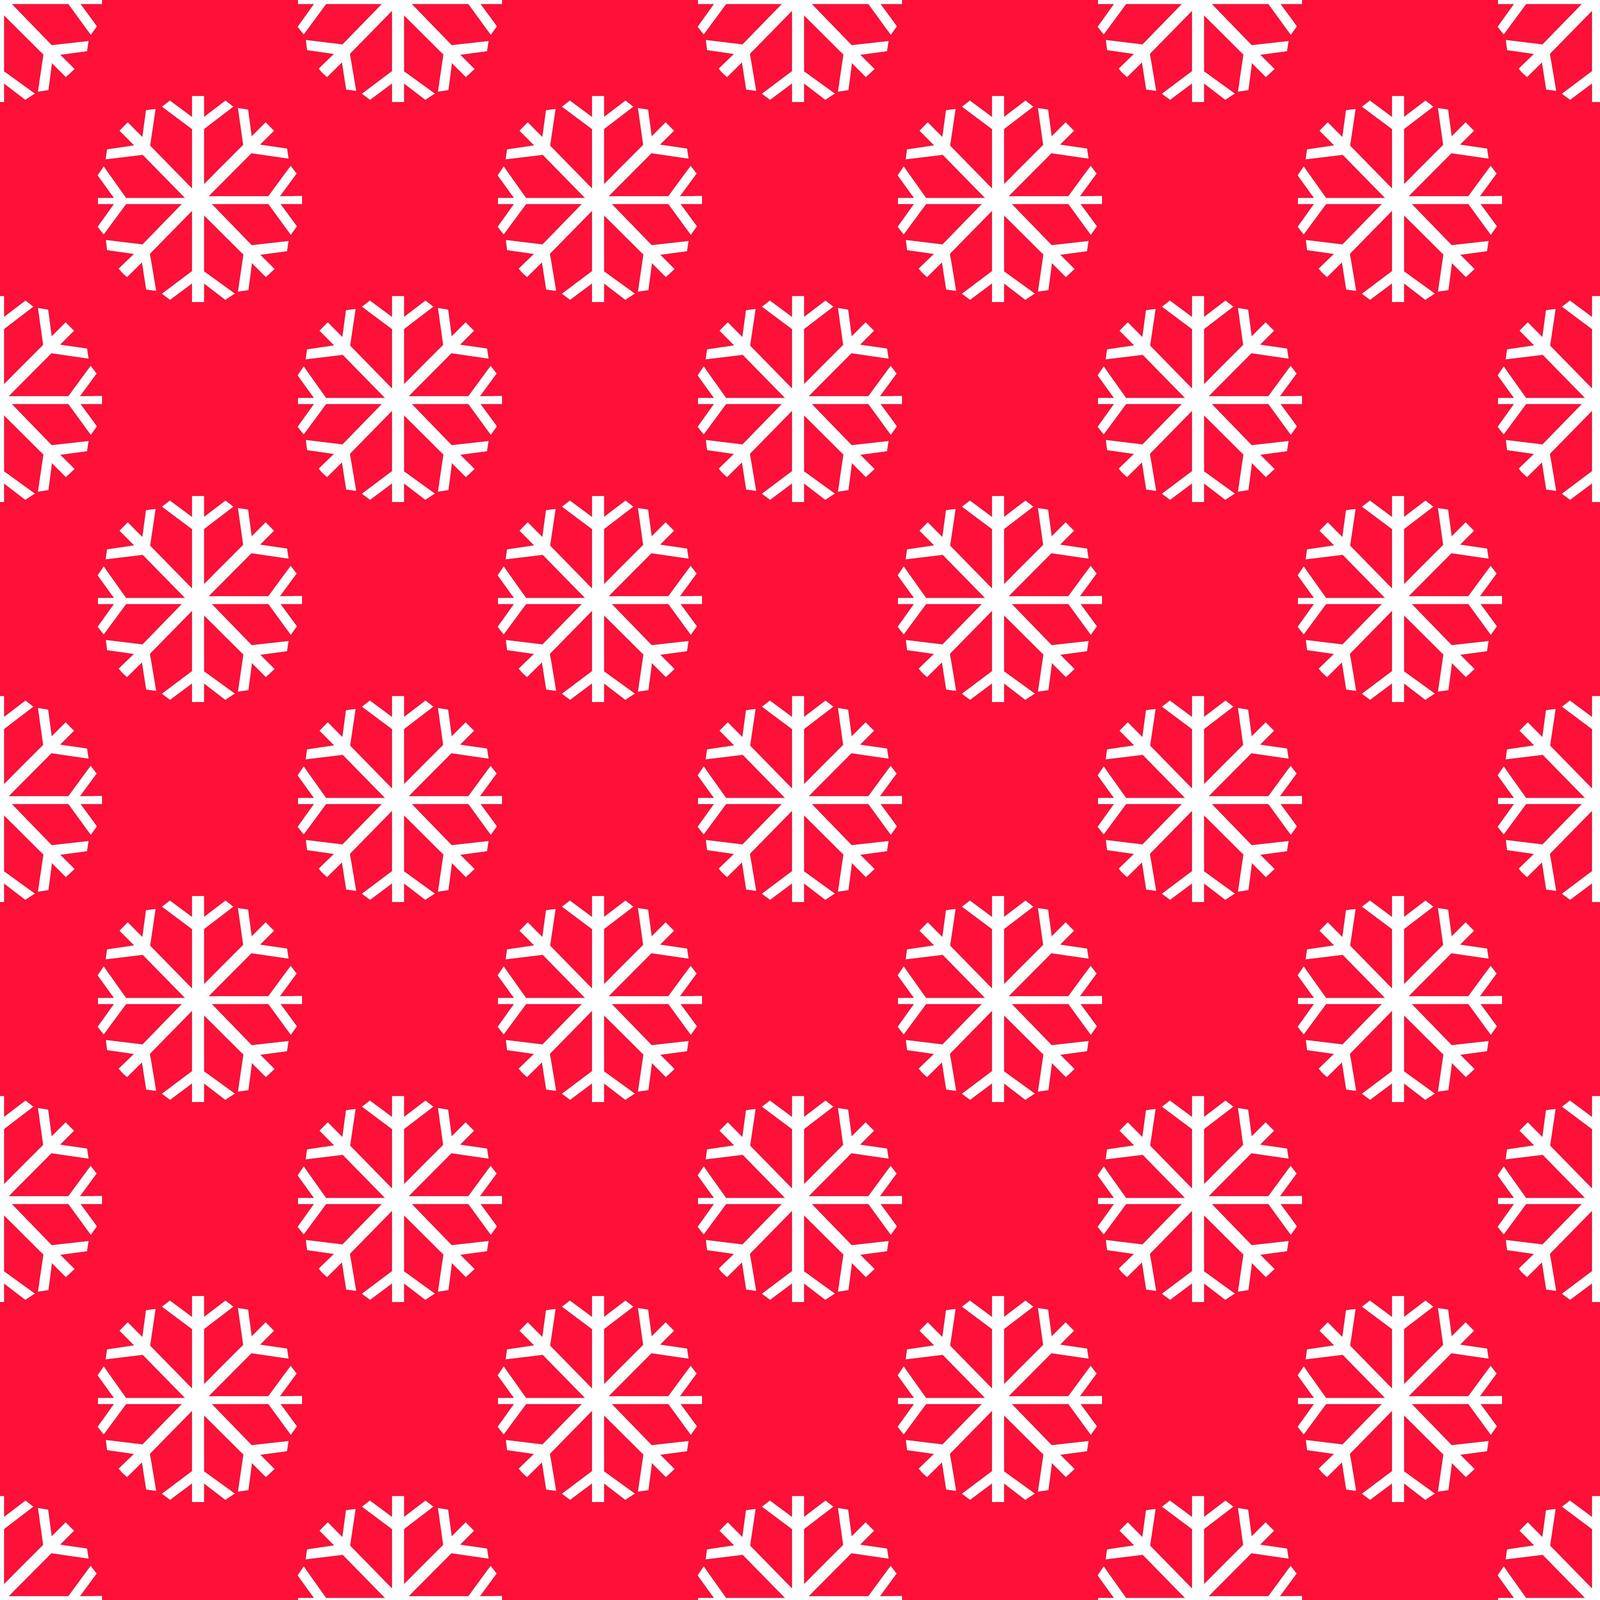 Snowflake Pattern - Snowflake vector pattern. Each snowflake is grouped individually for easy editing. by Alxyzt